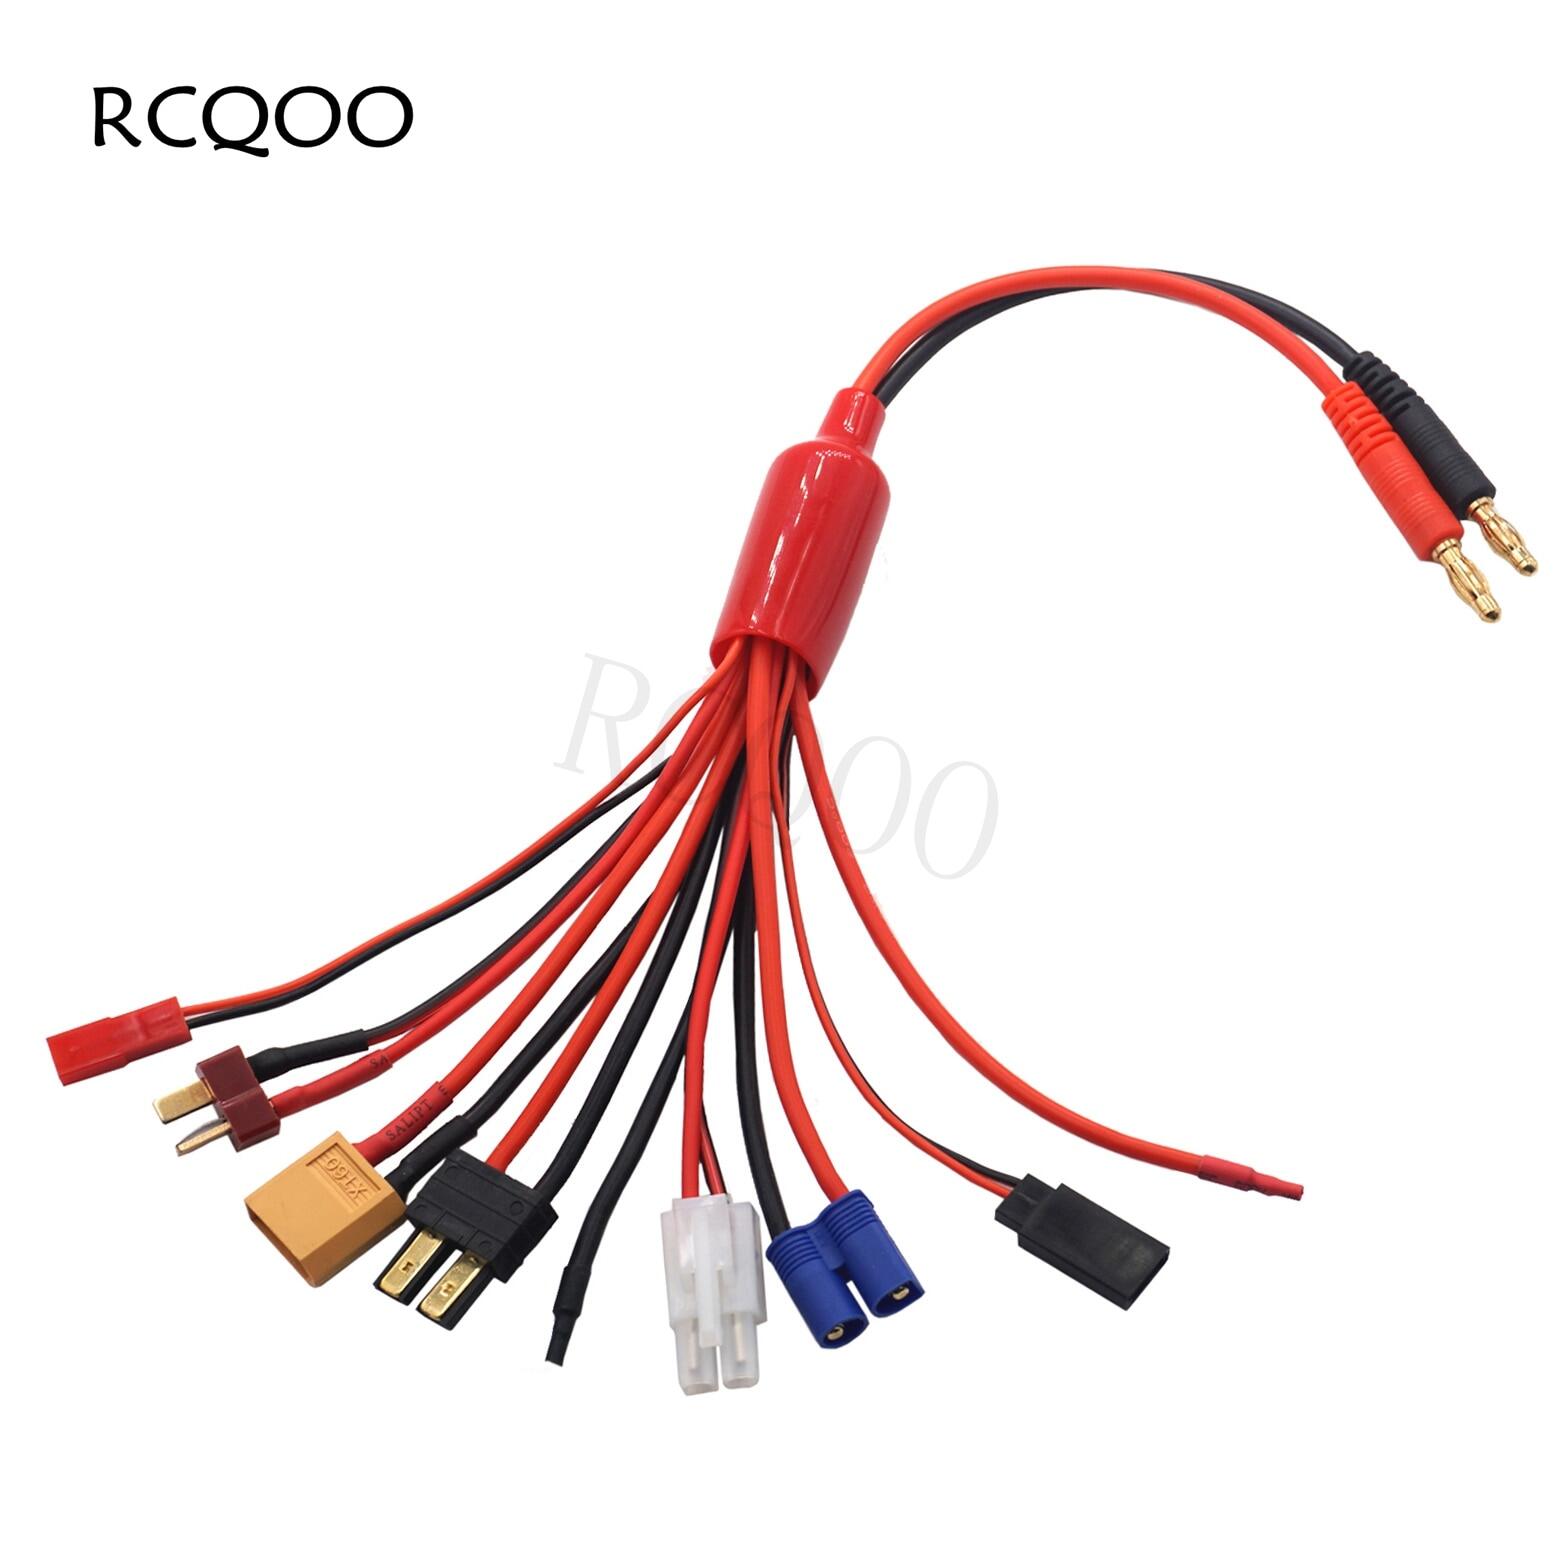 8in1 Rc Car Battery Charging Charge Cable For Tamiya Hpi Losi Kyosho Traxxas 